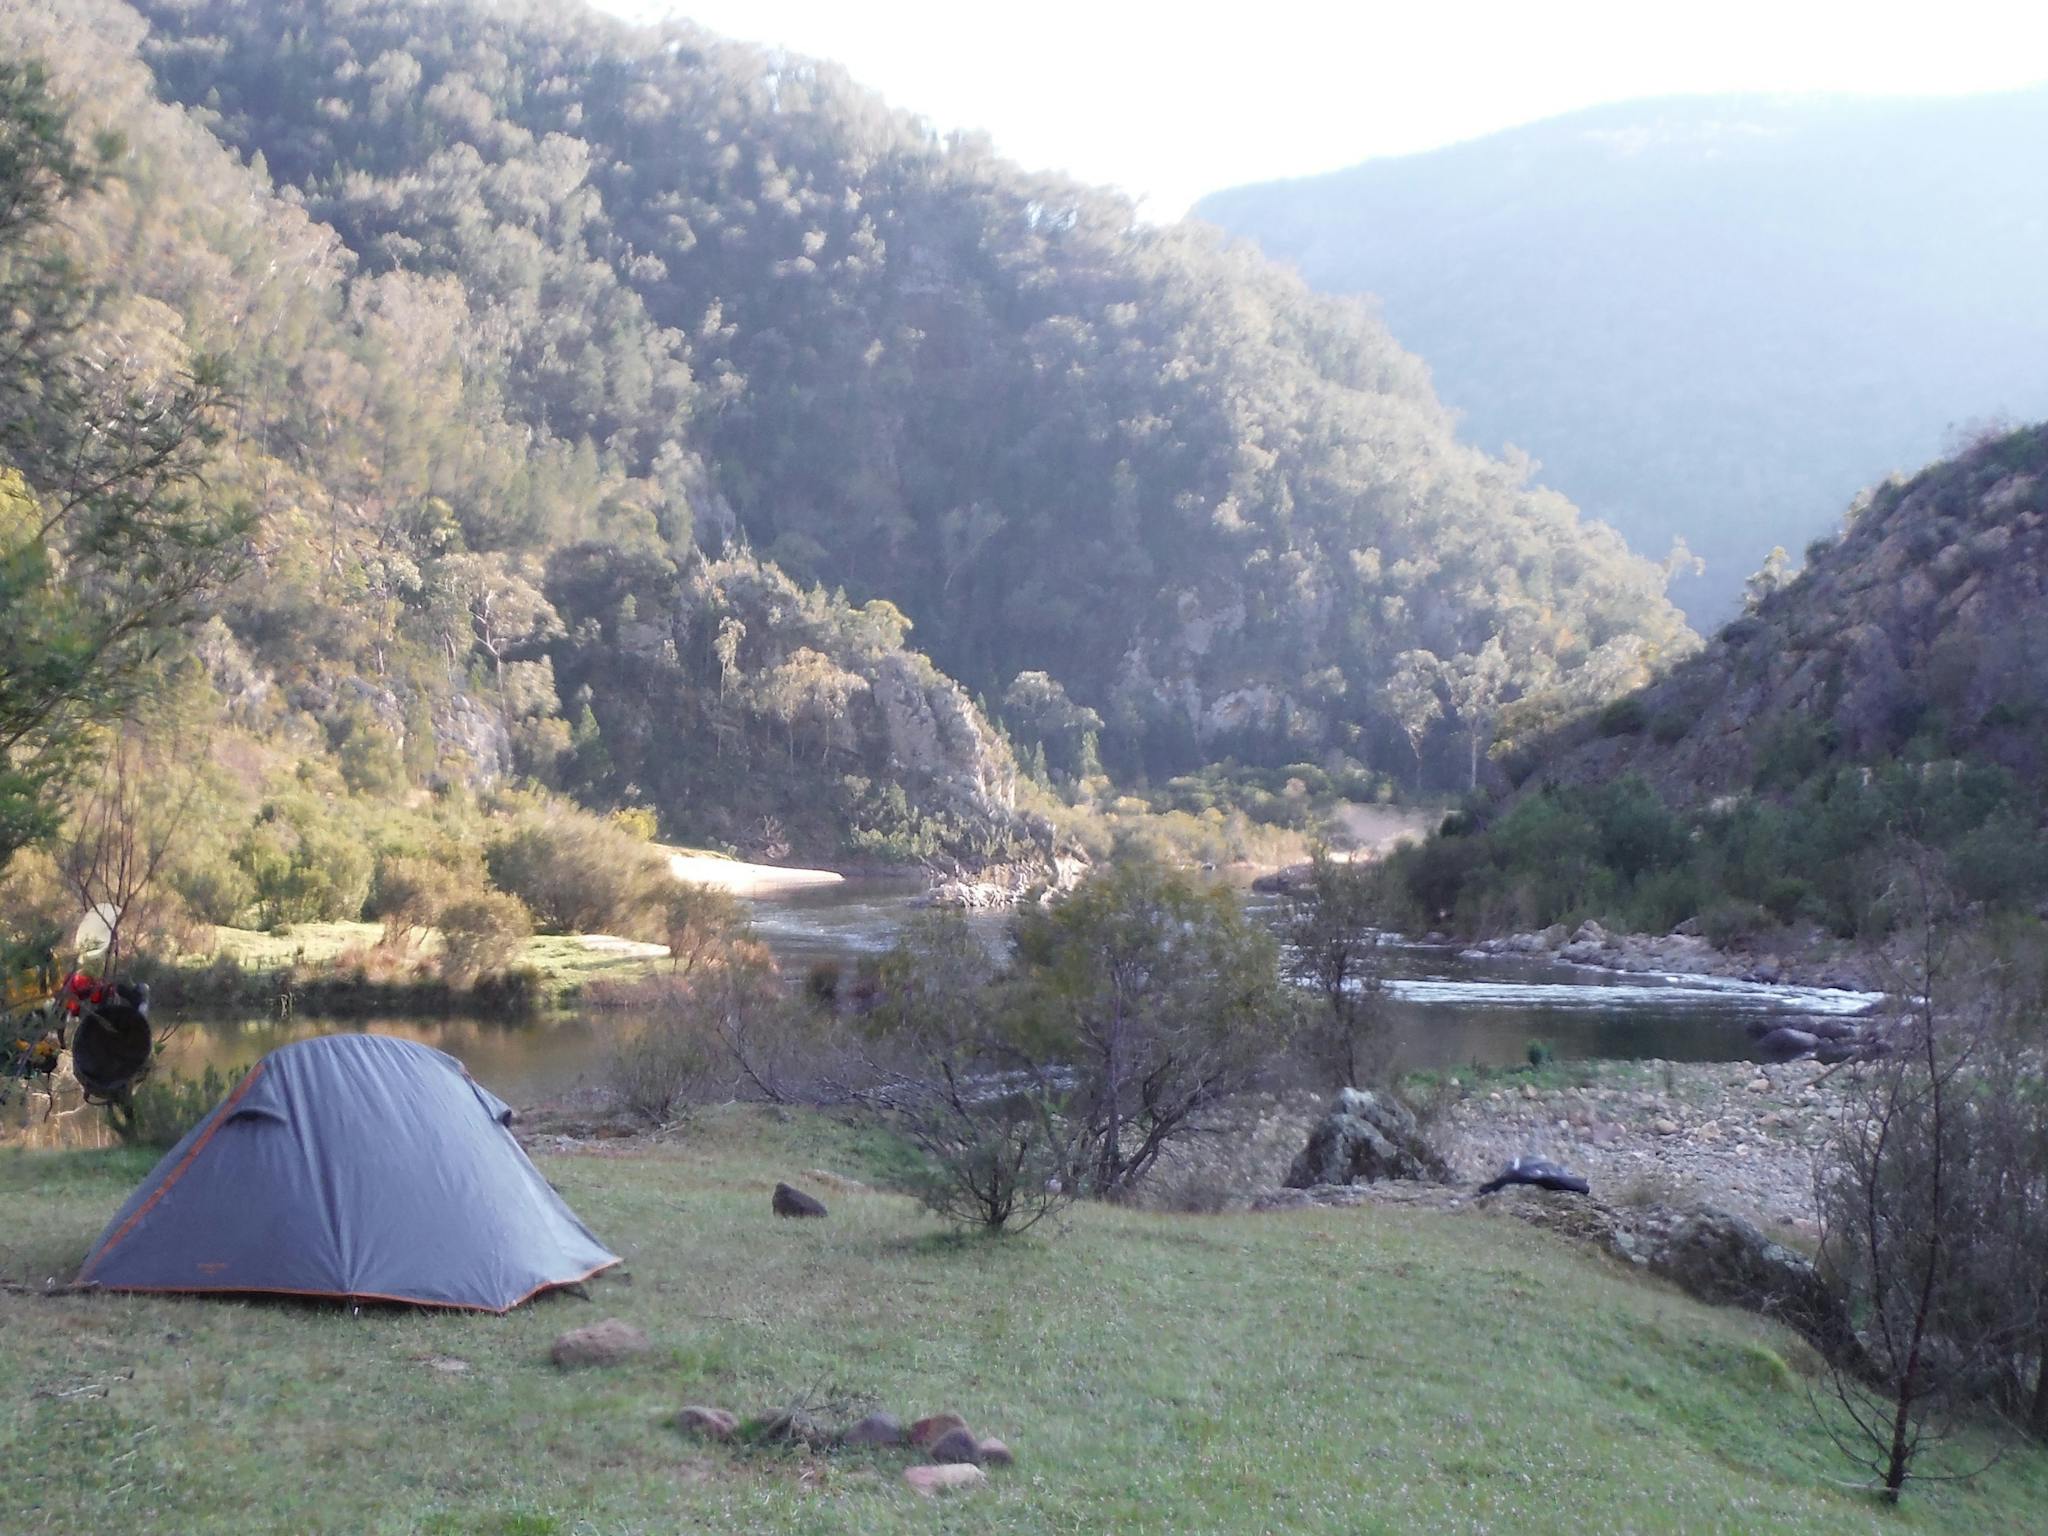 A tent is in the foreground on the edge of the Snowy River, beautiful  mountains in the background